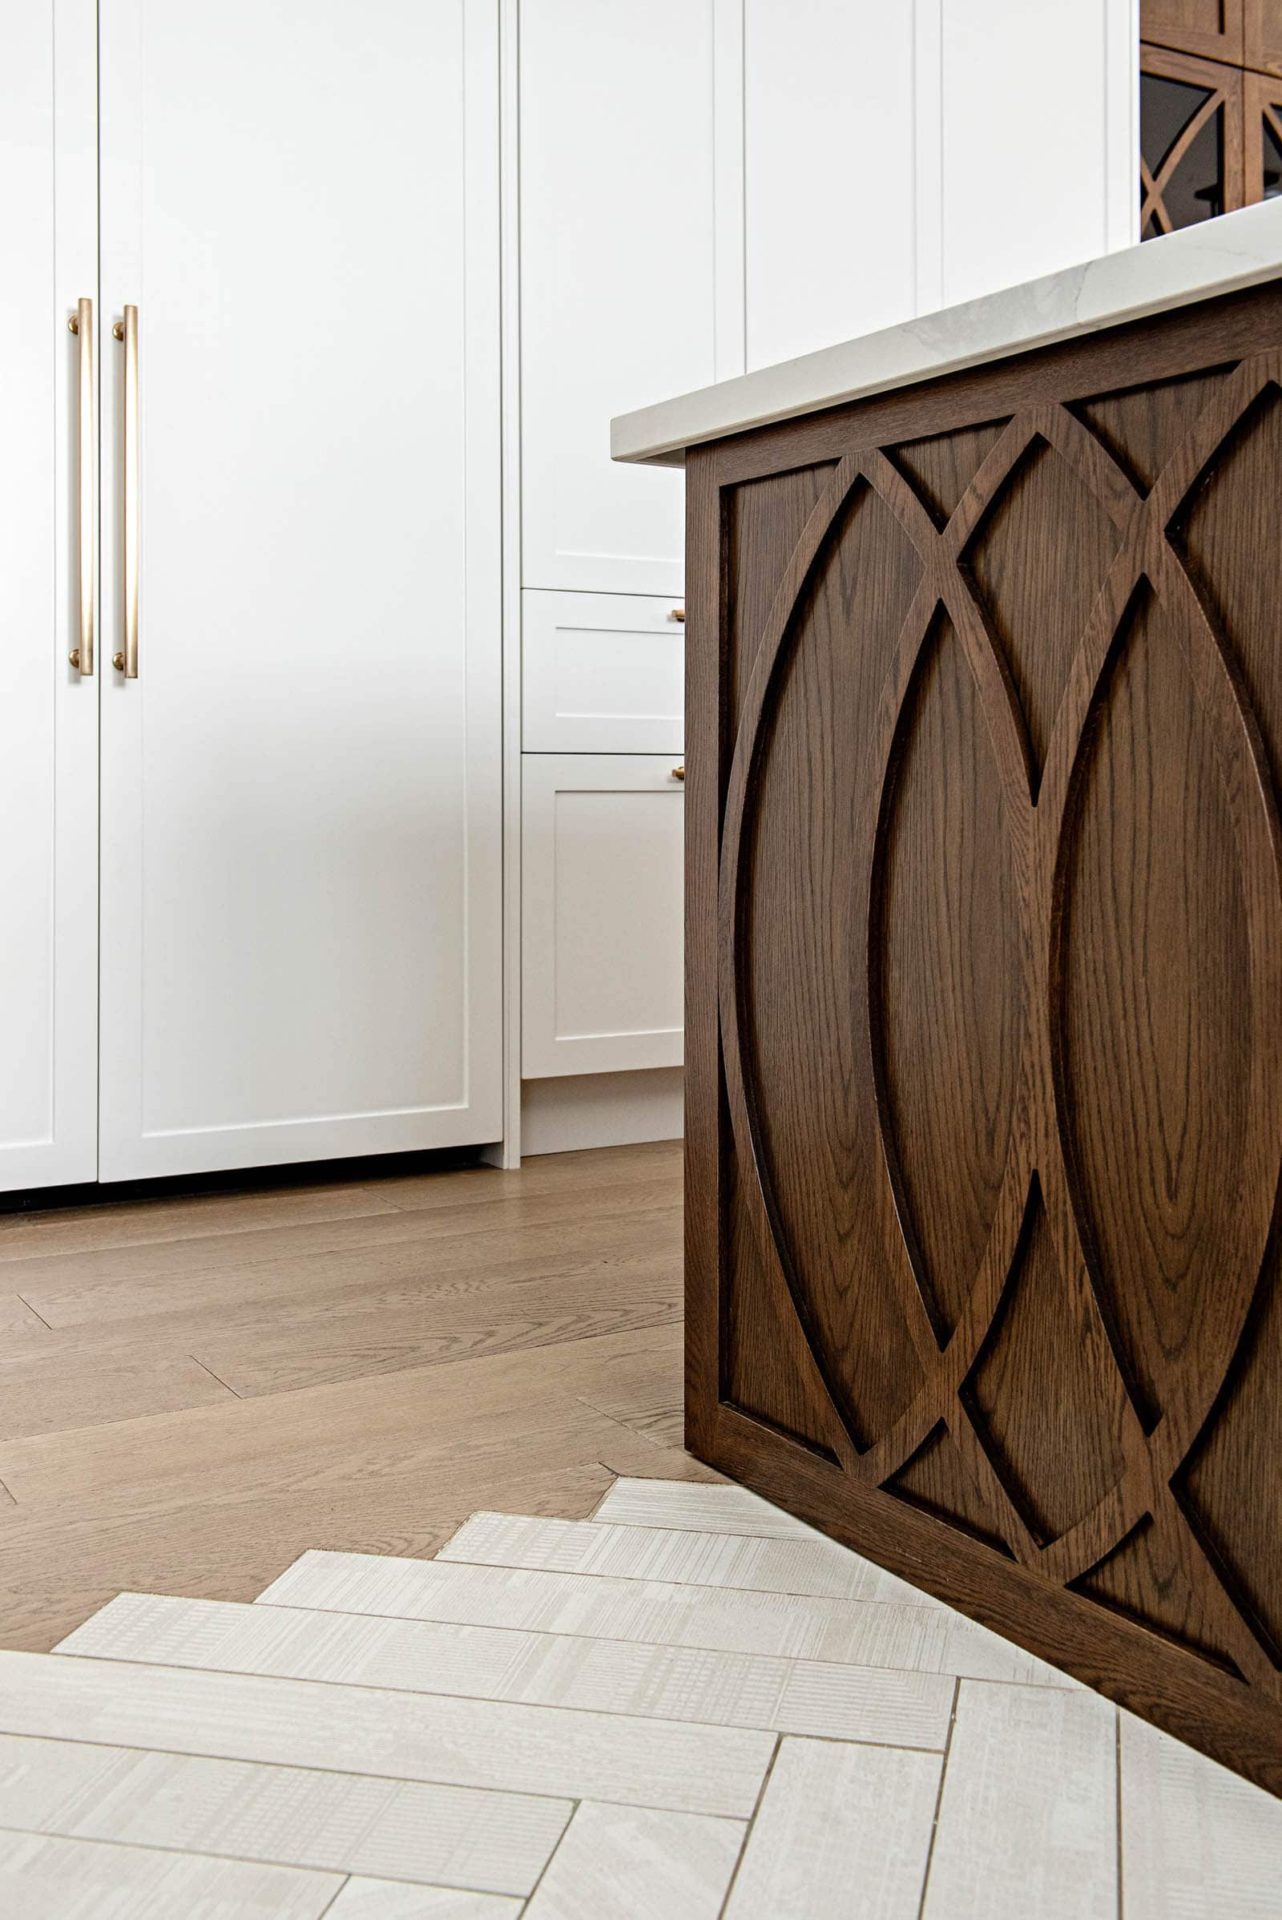 White kitchen cabinets with wood island and herringbone tile to wood transition details